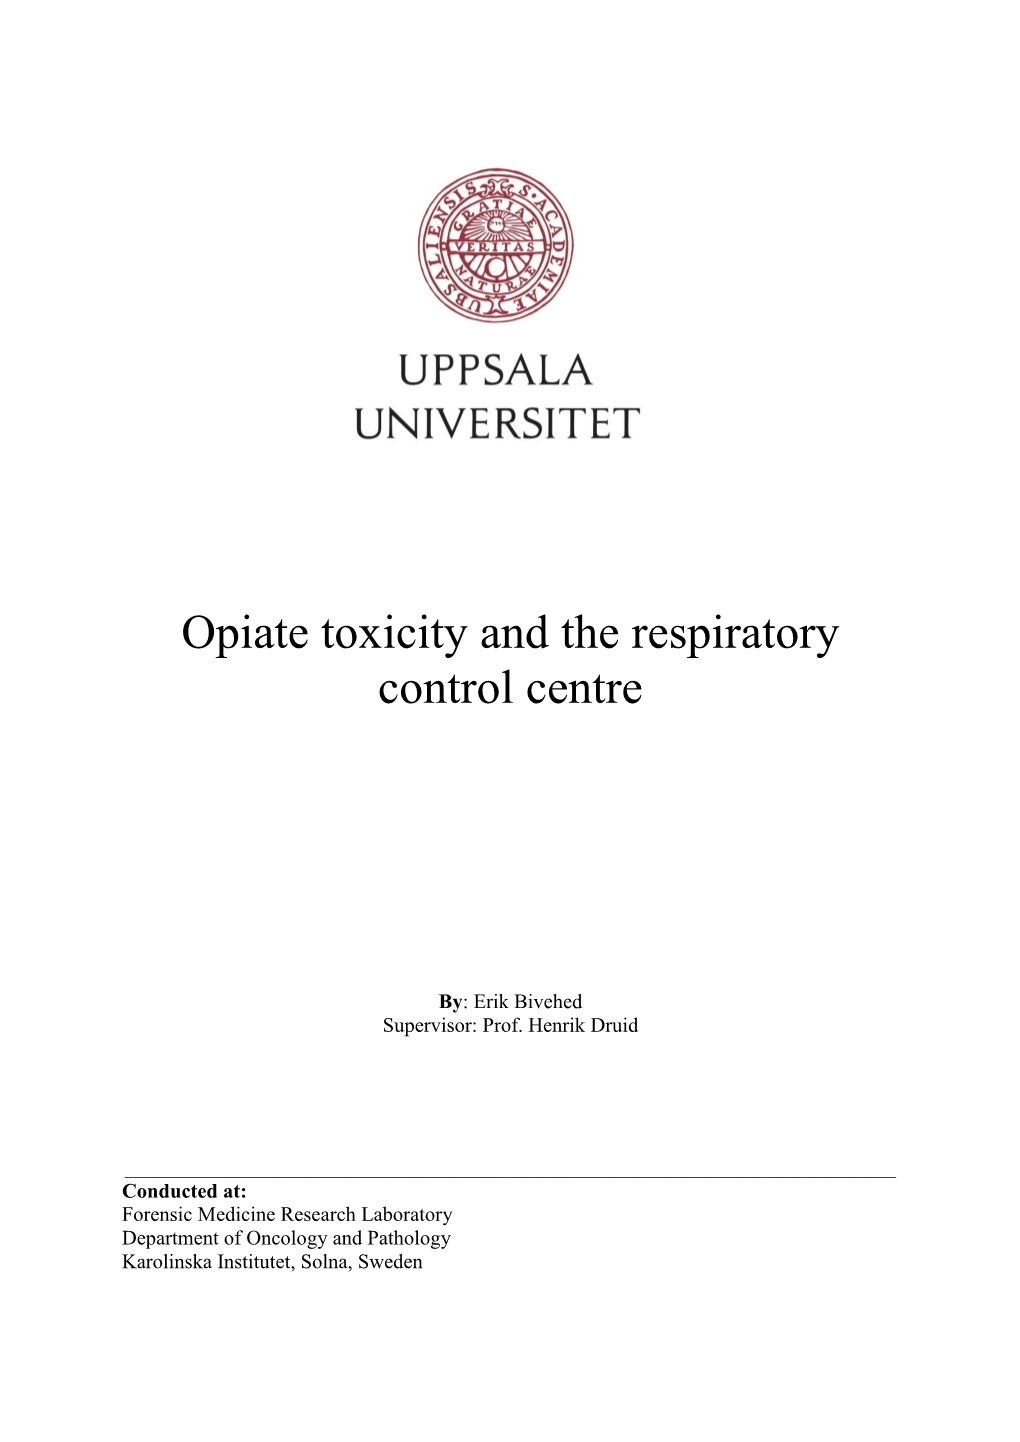 Opiate Toxicity and the Respiratory Control Centre